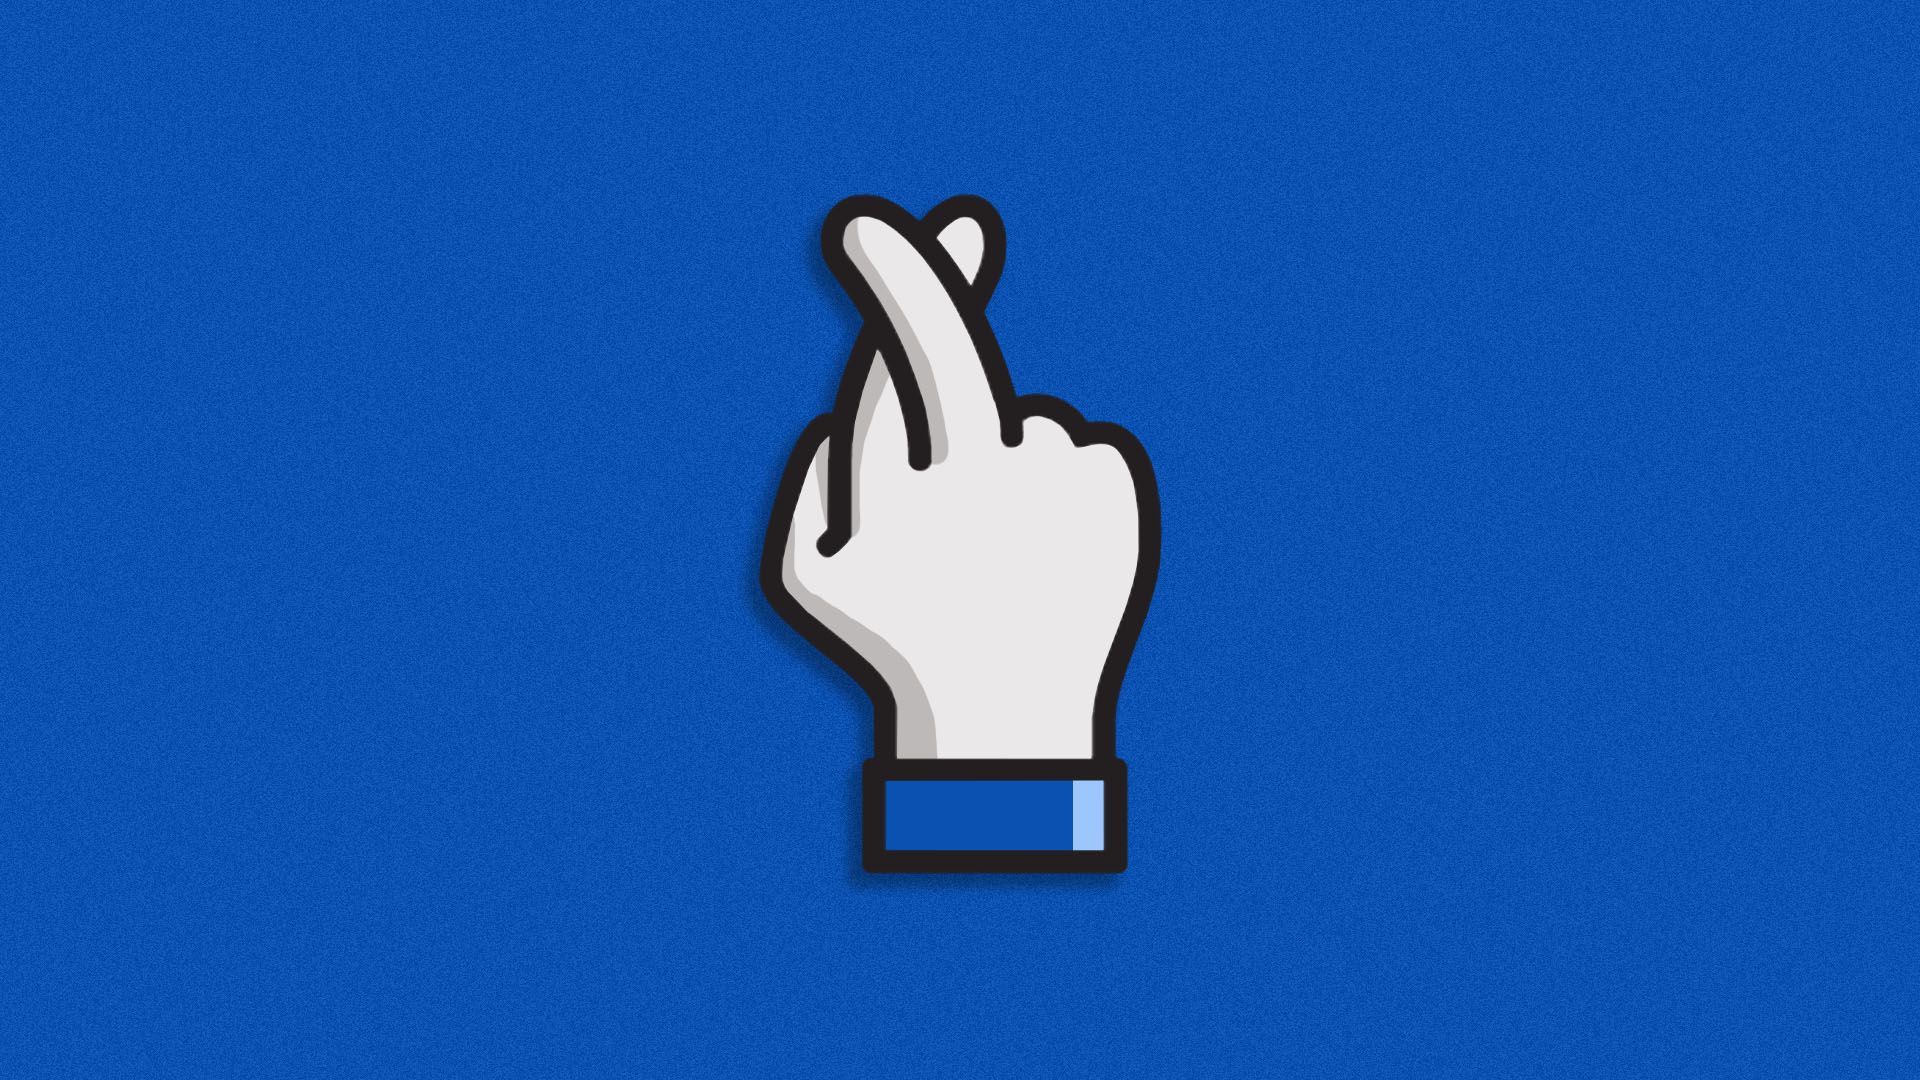 Illustration of the Facebook "like" button with fingers crossed